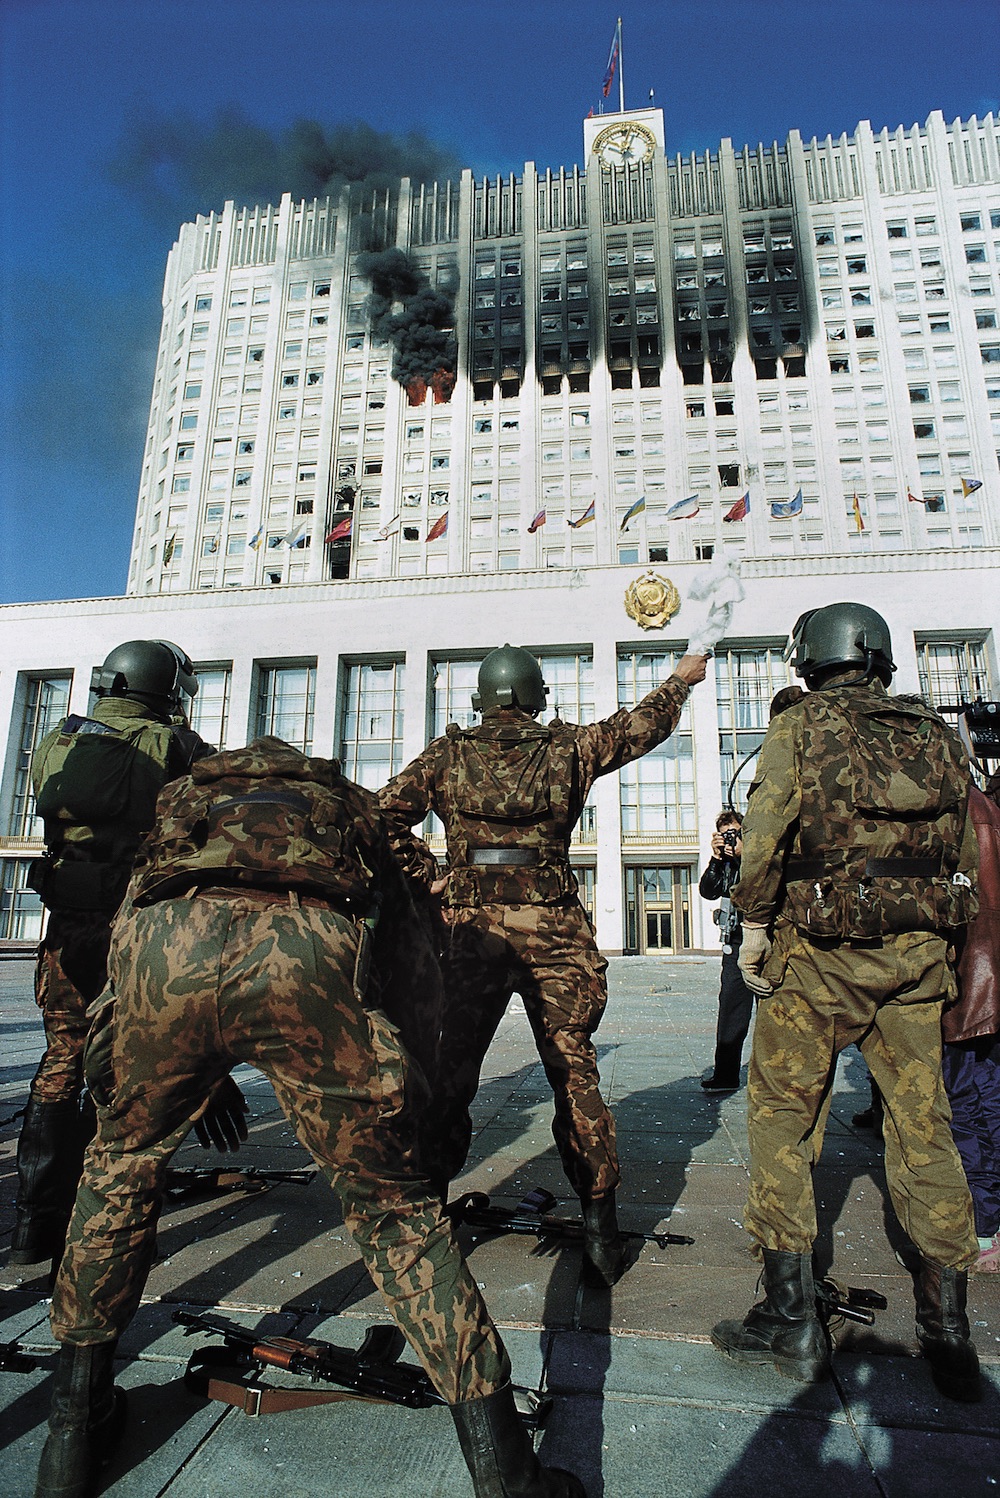 The bombardment of the parliament building in October 1993